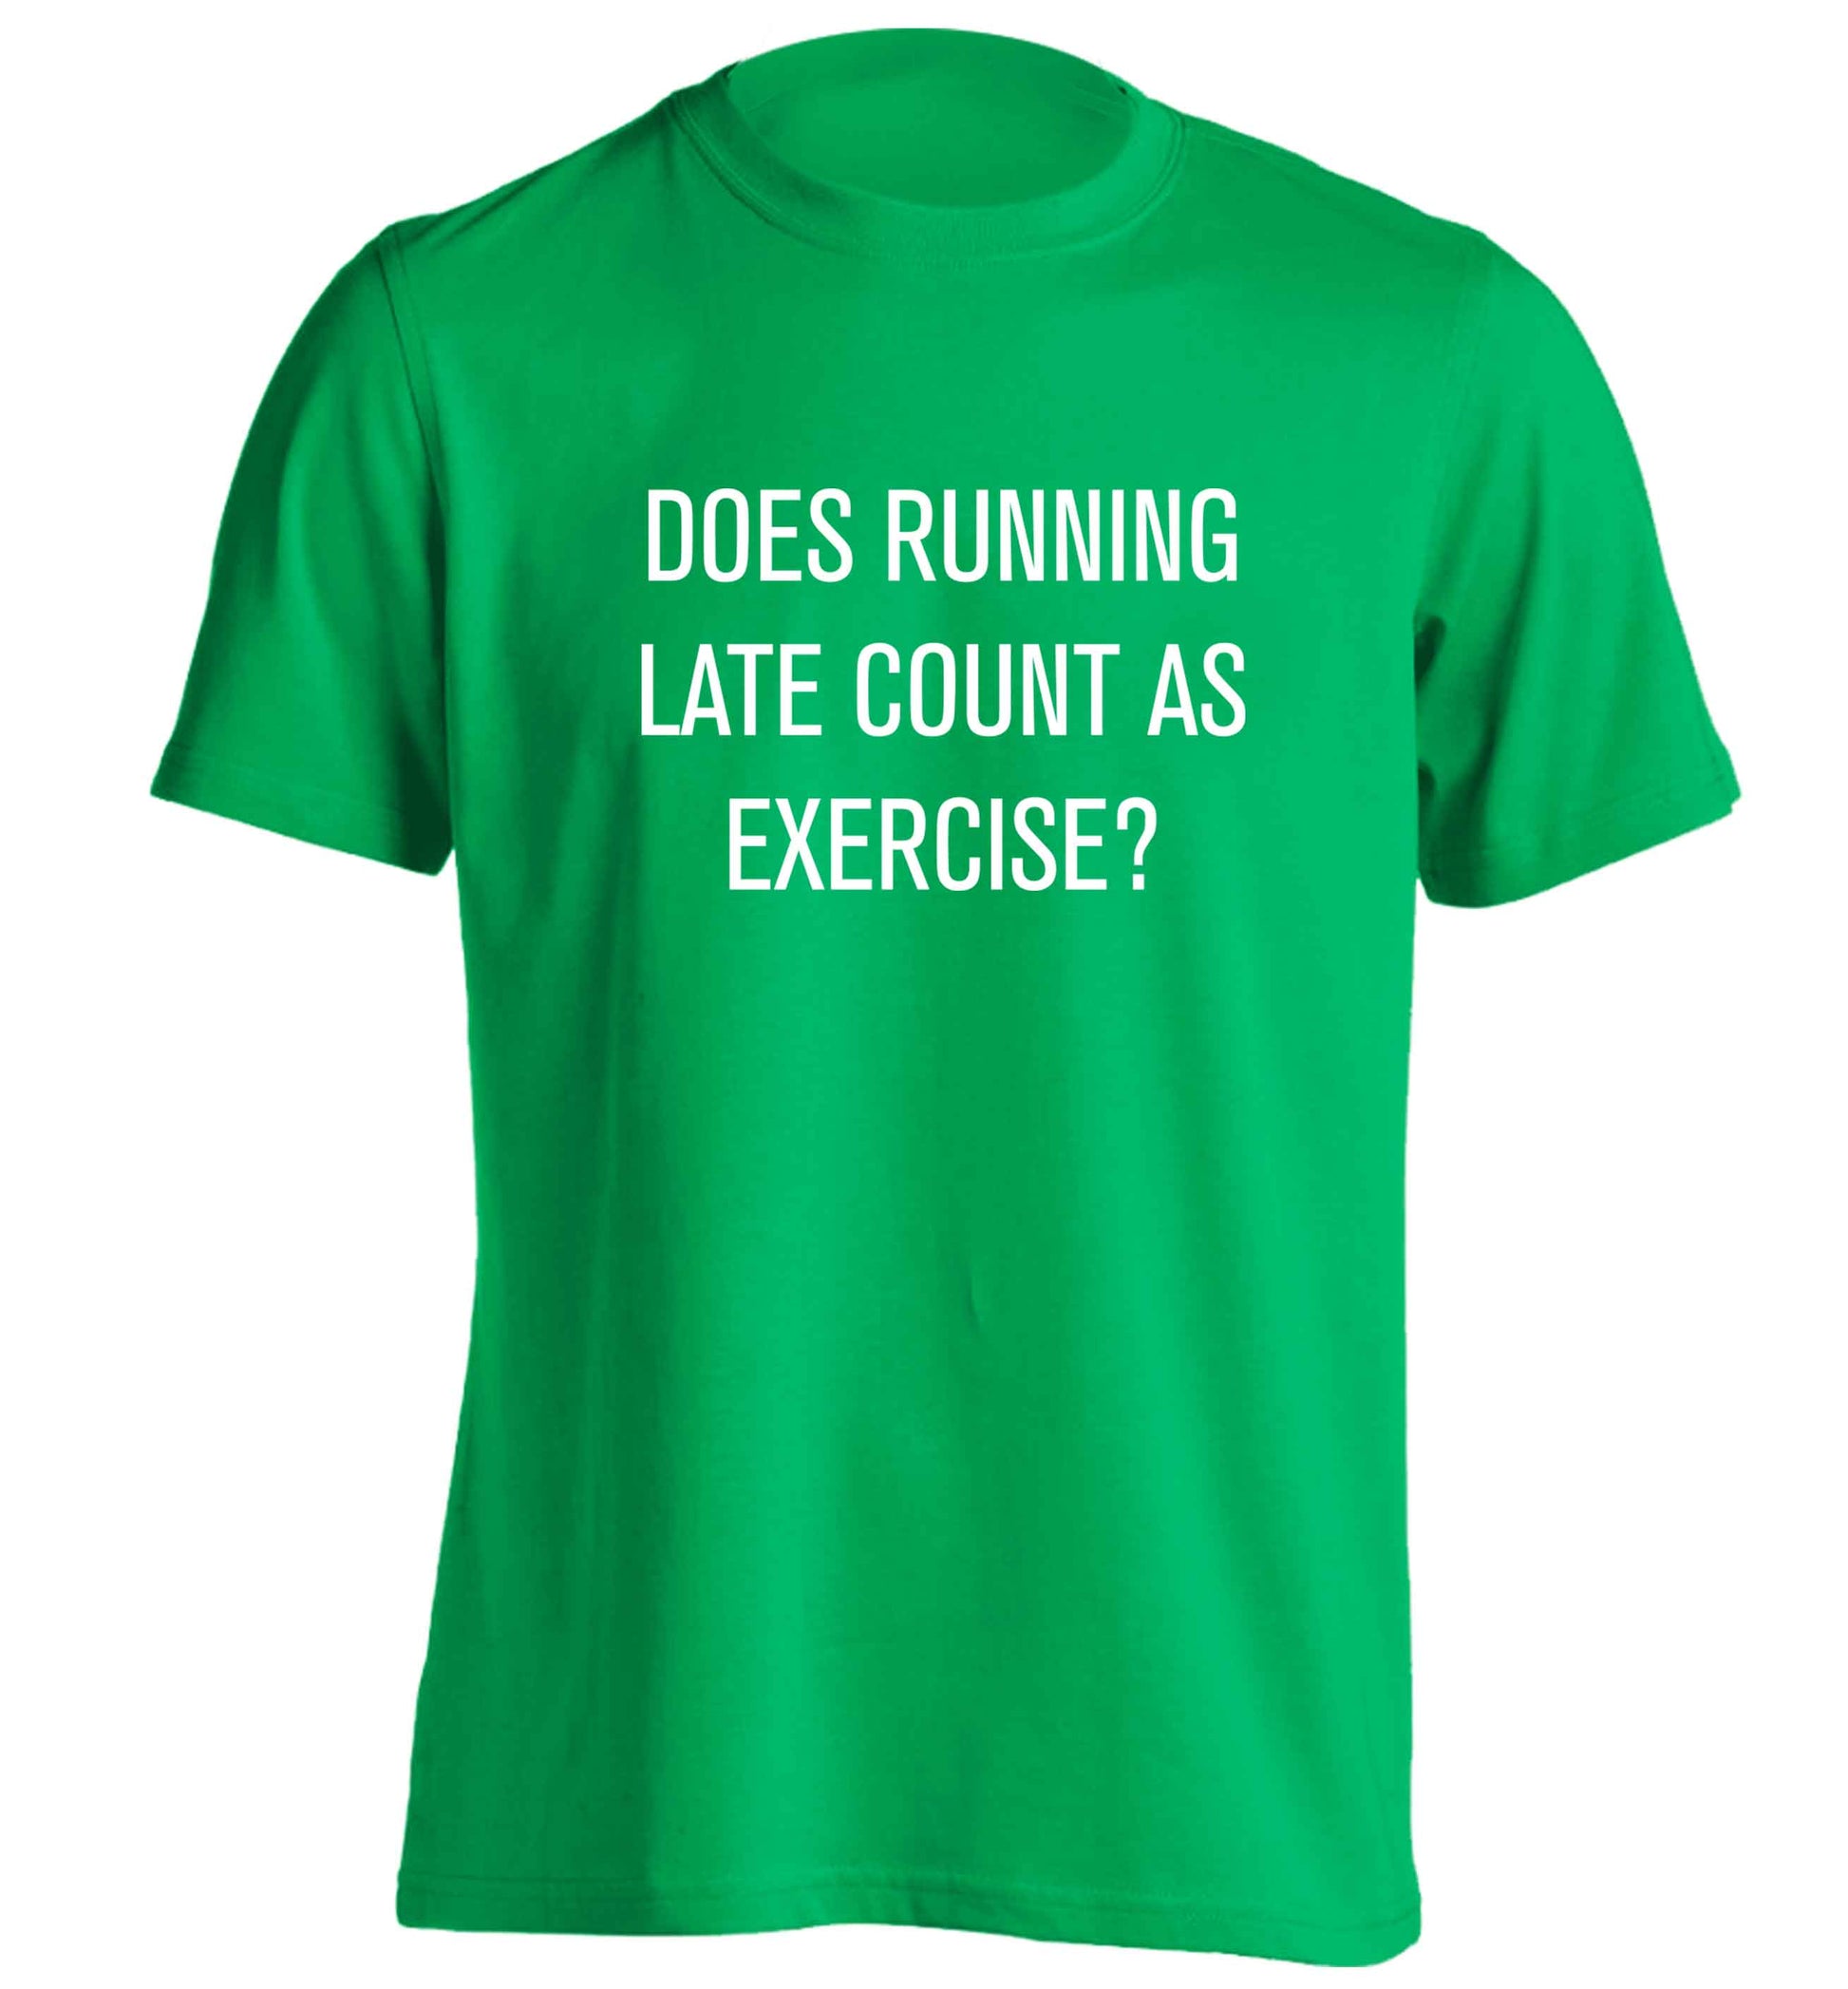 Does running late count as exercise? adults unisex green Tshirt 2XL